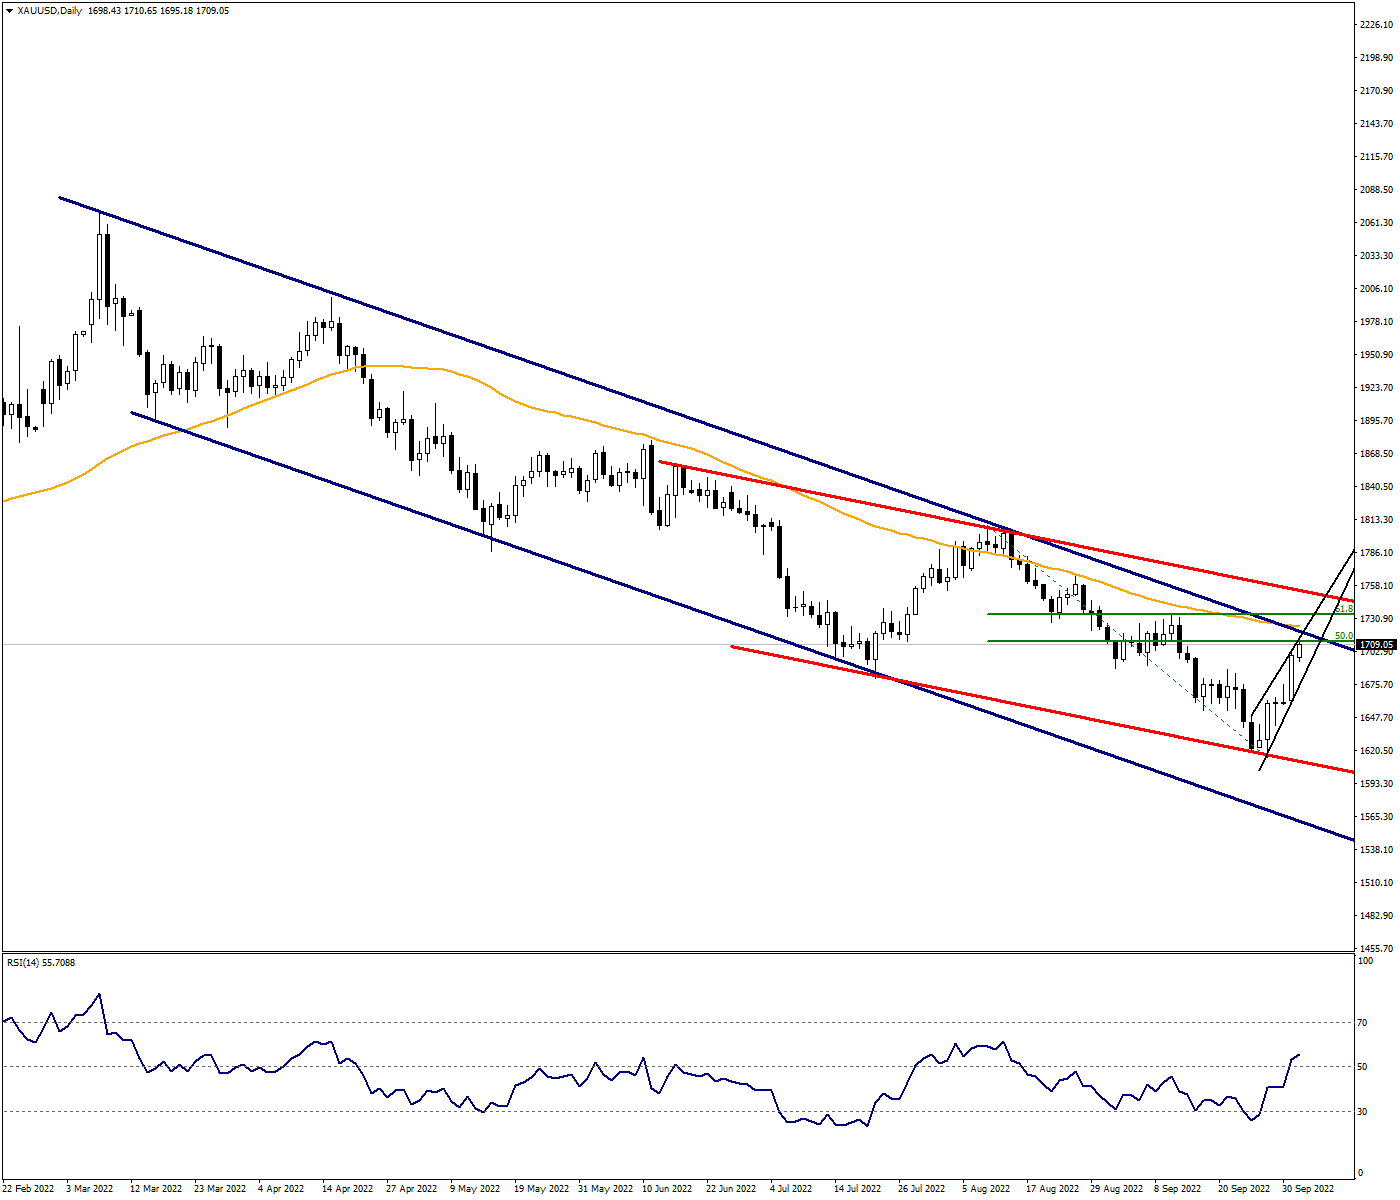 XAUUSD: Recovery in Ounce Gold May Not Be Permanent